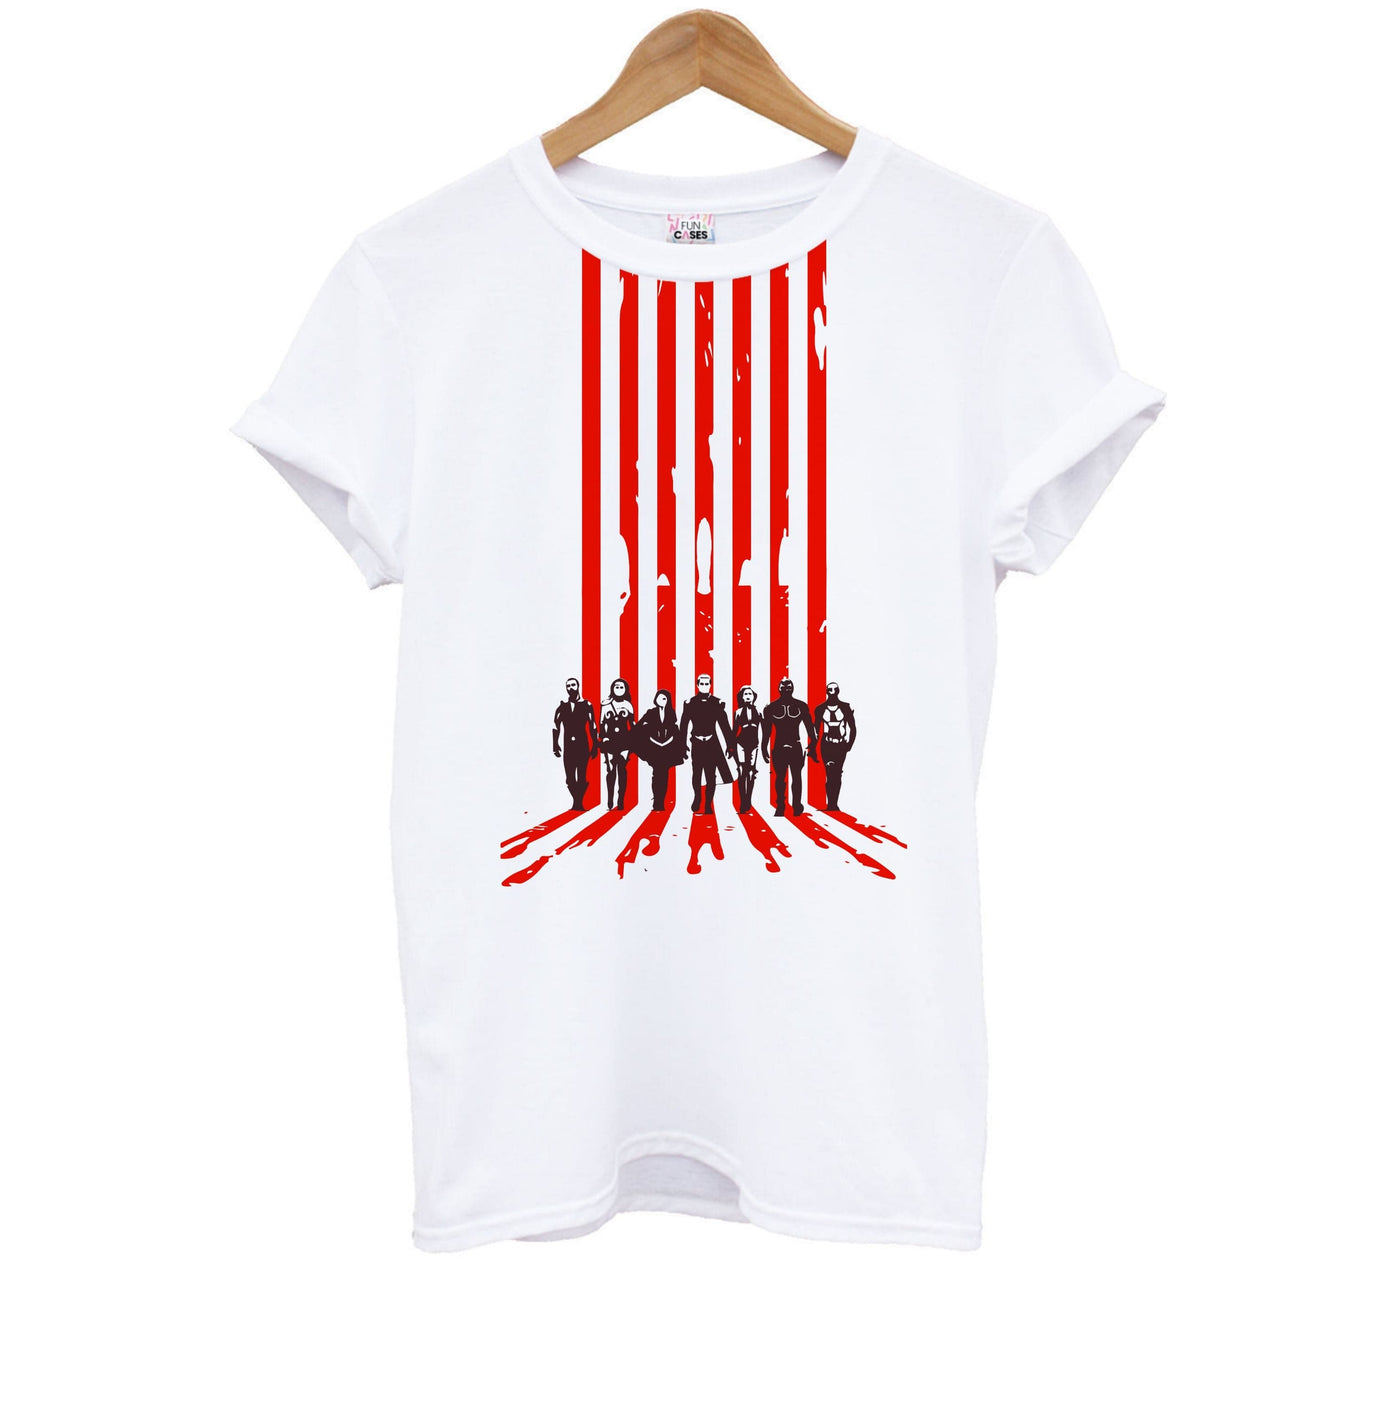 The Seven Silhouettes - The Boys Kids T-Shirt